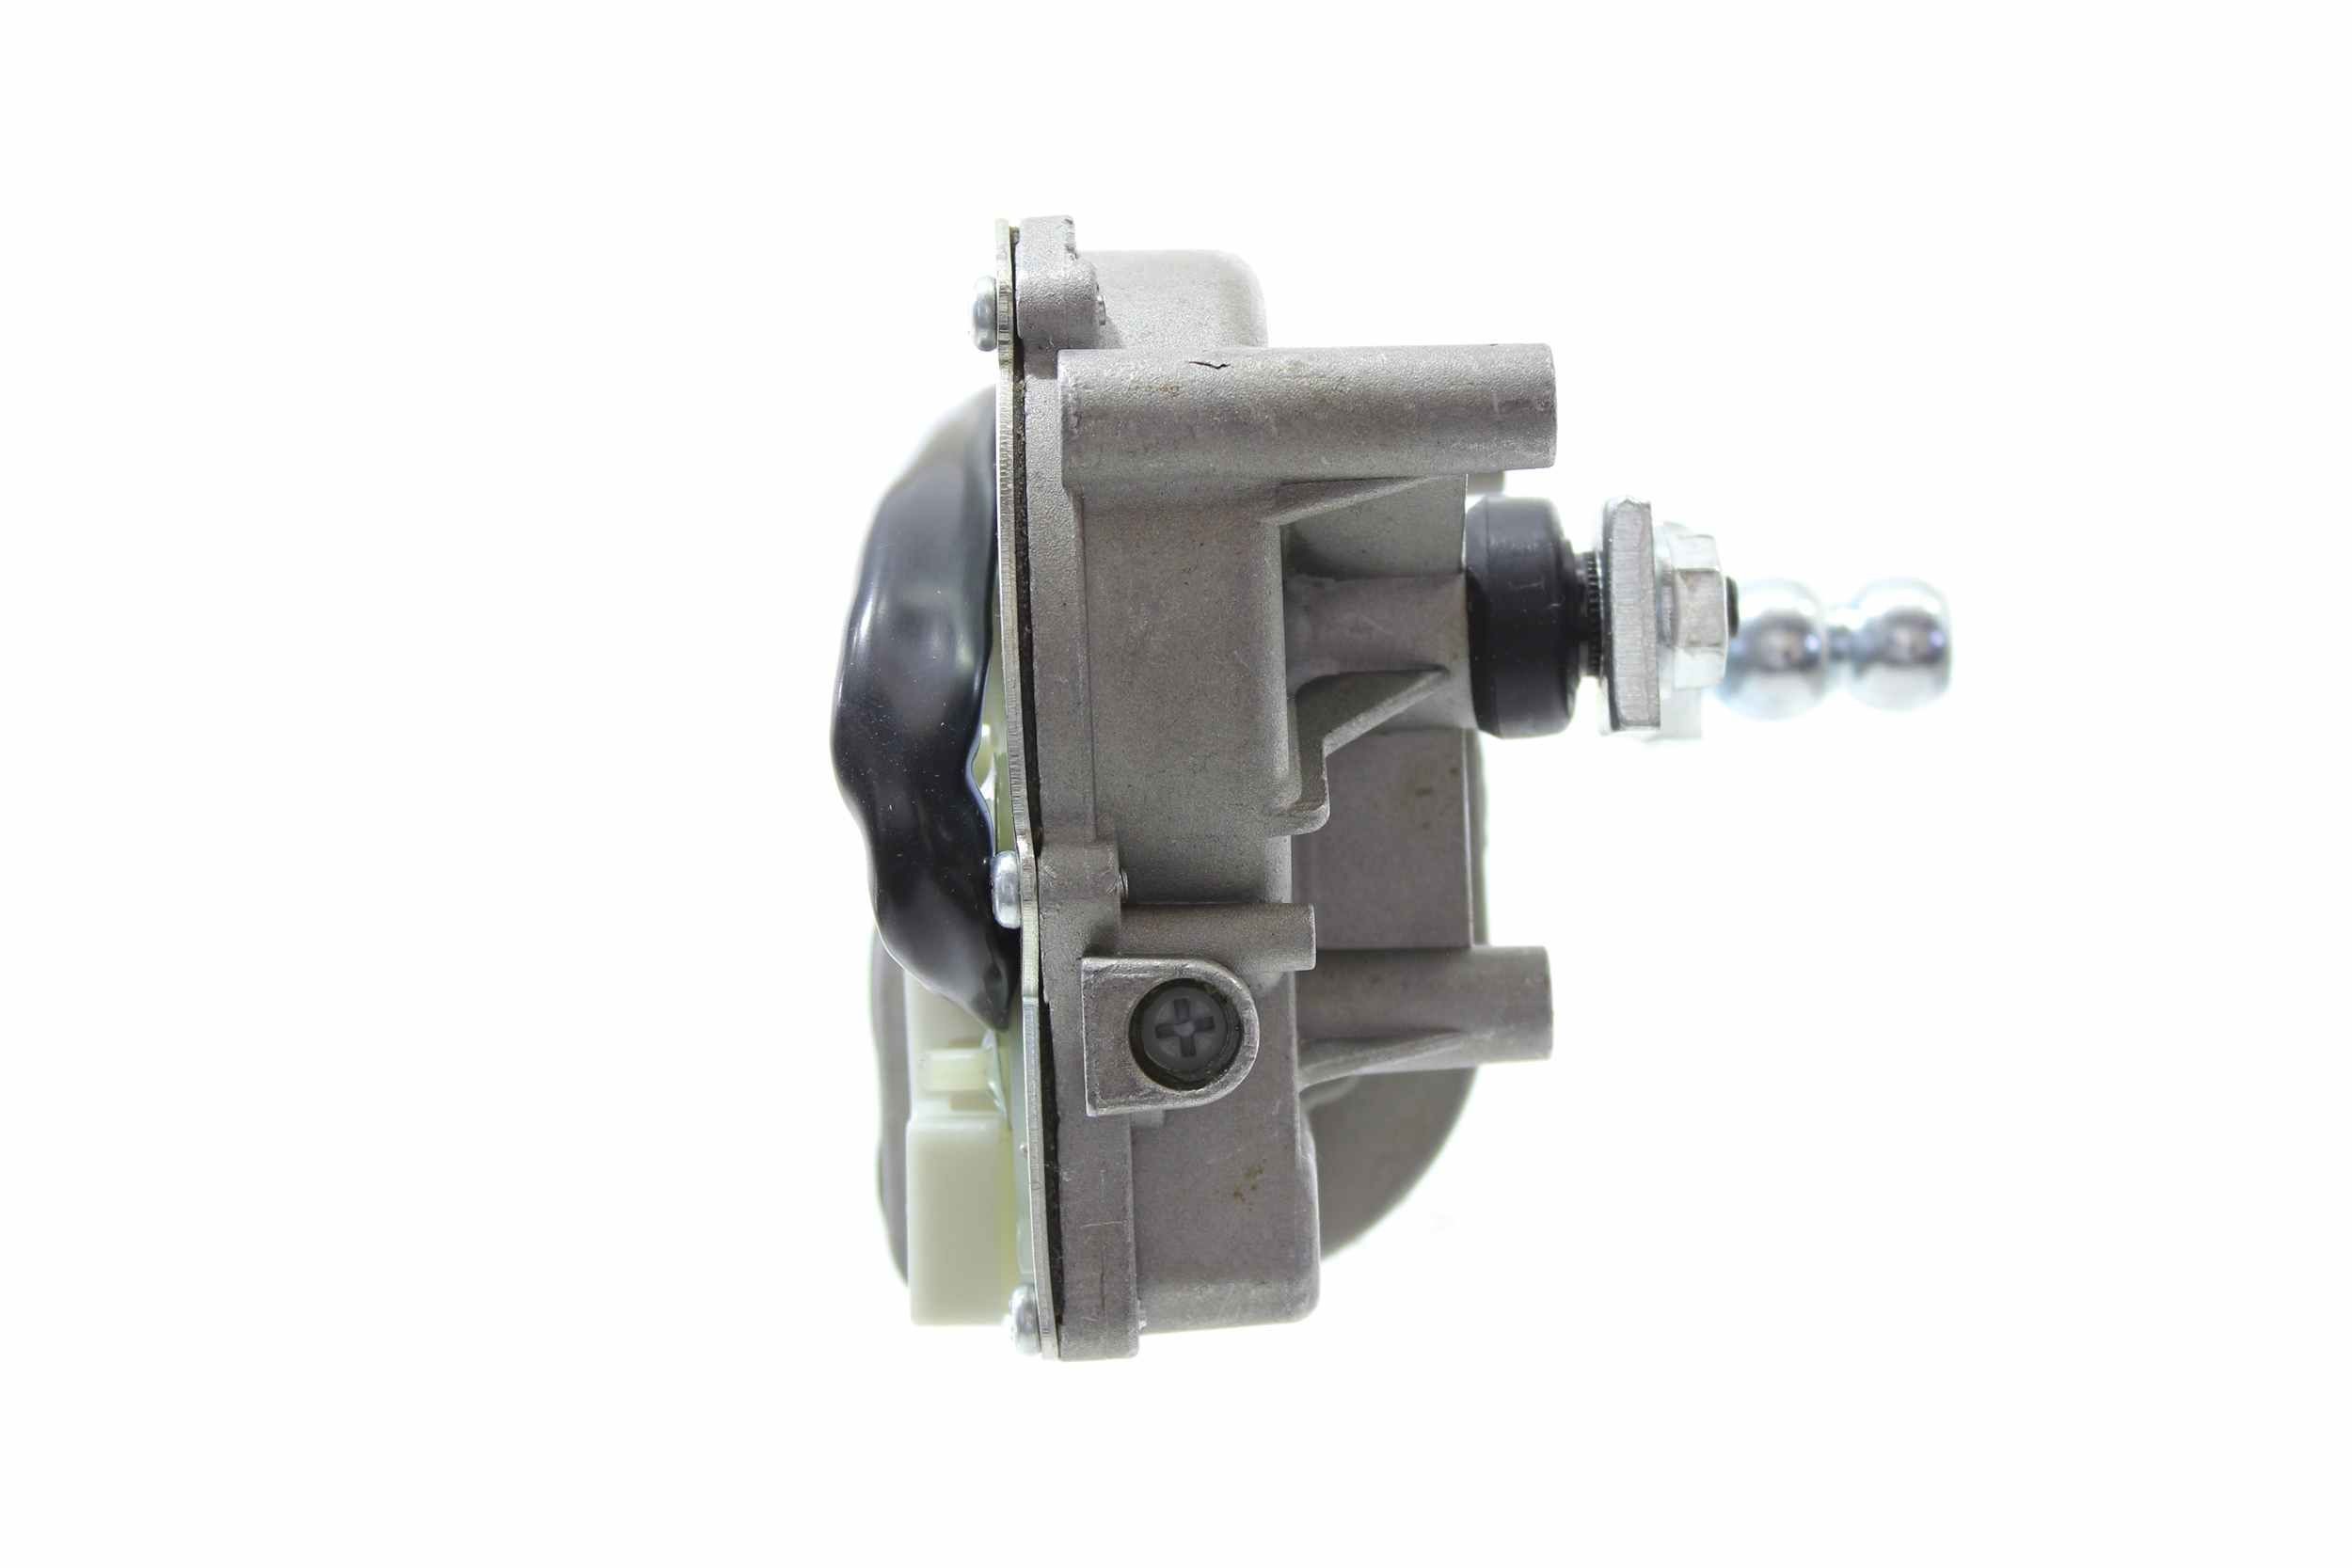 ALANKO 10800924 Wiper motors 24V, Front, for left-hand/right-hand drive vehicles